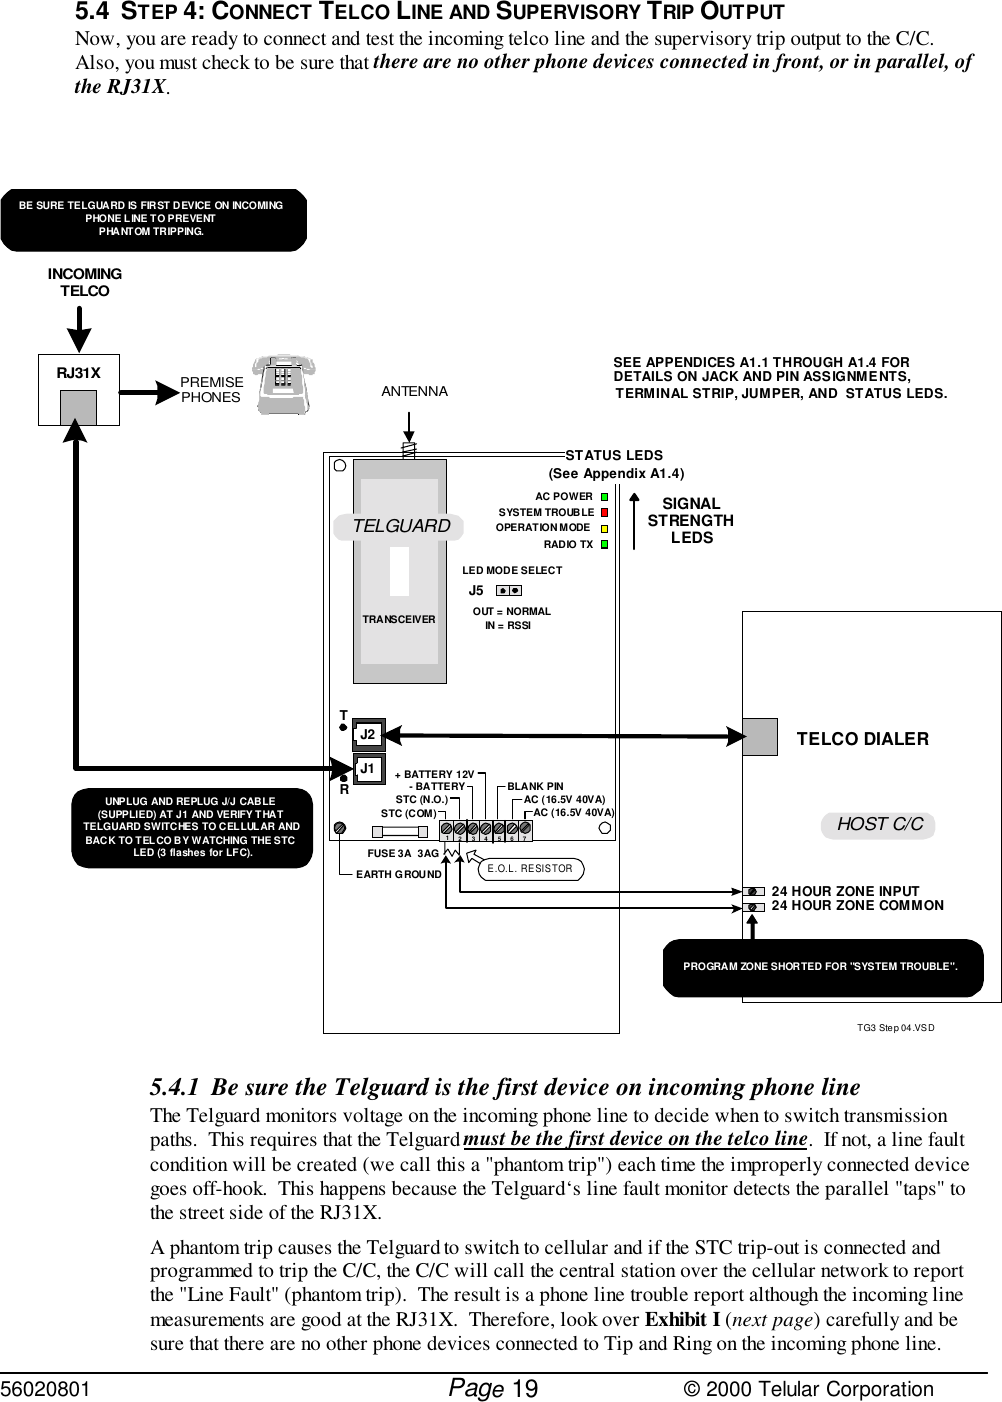 56020801         Page                             © 2000 Telular Corporation195.4 STEP 4: CONNECT TELCO LINE AND SUPERVISORY TRIP OUTPUTNow, you are ready to connect and test the incoming telco line and the supervisory trip output to the C/C. Also, you must check to be sure that there are no other phone devices connected in front, or in parallel, ofthe RJ31X. 5.4.1 Be sure the Telguard is the first device on incoming phone lineThe Telguard monitors voltage on the incoming phone line to decide when to switch transmissionpaths.  This requires that the Telguard must be the first device on the telco line.  If not, a line faultcondition will be created (we call this a &quot;phantom trip&quot;) each time the improperly connected devicegoes off-hook.  This happens because the Telguard‘s line fault monitor detects the parallel &quot;taps&quot; tothe street side of the RJ31X. A phantom trip causes the Telguard to switch to cellular and if the STC trip-out is connected andprogrammed to trip the C/C, the C/C will call the central station over the cellular network to reportthe &quot;Line Fault&quot; (phantom trip).  The result is a phone line trouble report although the incoming linemeasurements are good at the RJ31X.  Therefore, look over Exhibit I (next page) carefully and besure that there are no other phone devices connected to Tip and Ring on the incoming phone line.TG3 Step 04.VSDHOST C/C24 HOUR ZONE COMMON24 HOUR ZONE INPUTTELCO DIALERDETAILS ON JACK AND PIN ASSIGNME NTS,TERMINAL STRIP, JUMPER, AND  STATUS LEDS.SEE APPENDICES A1.1 THROUGH A1.4 FORJ2FUSE 3A  3AGTR123456STC (COM)STC (N.O.)+ BATTERY 12V- BATTERY7AC (16.5V 40VA)AC (16.5V 40VA)BLANK PINJ1EARTH G ROUNDUNPLUG AND REPLUG J/J CABLE(SUPPLIED) AT J1 AND VERIFY THATTELGUARD SWITCHES TO CELLULAR ANDBACK TO T ELCO BY WATCHING THE STCLED (3 flashes for LFC).PROGRAM ZONE SHORTED FOR &quot;SYSTEM TROUBLE&quot;.E.O.L. RESISTORRANTENNATRANSCEIVERRJ31XPREMISEPHONESINCOMINGTELCOTELGUARDLED MODE SELECTJ5IN = RSSIOUT = NORMALSIGNALSTRENGTHLEDSAC POWERSYSTEM TROUBLERADIO TXOPERATION MODESTATUS LEDS(See Appendix A1.4) BE SURE TELGUARD IS FIRST DEVICE ON INCOMINGPHONE LINE TO PREVENTPHANTOM TRIPPING.